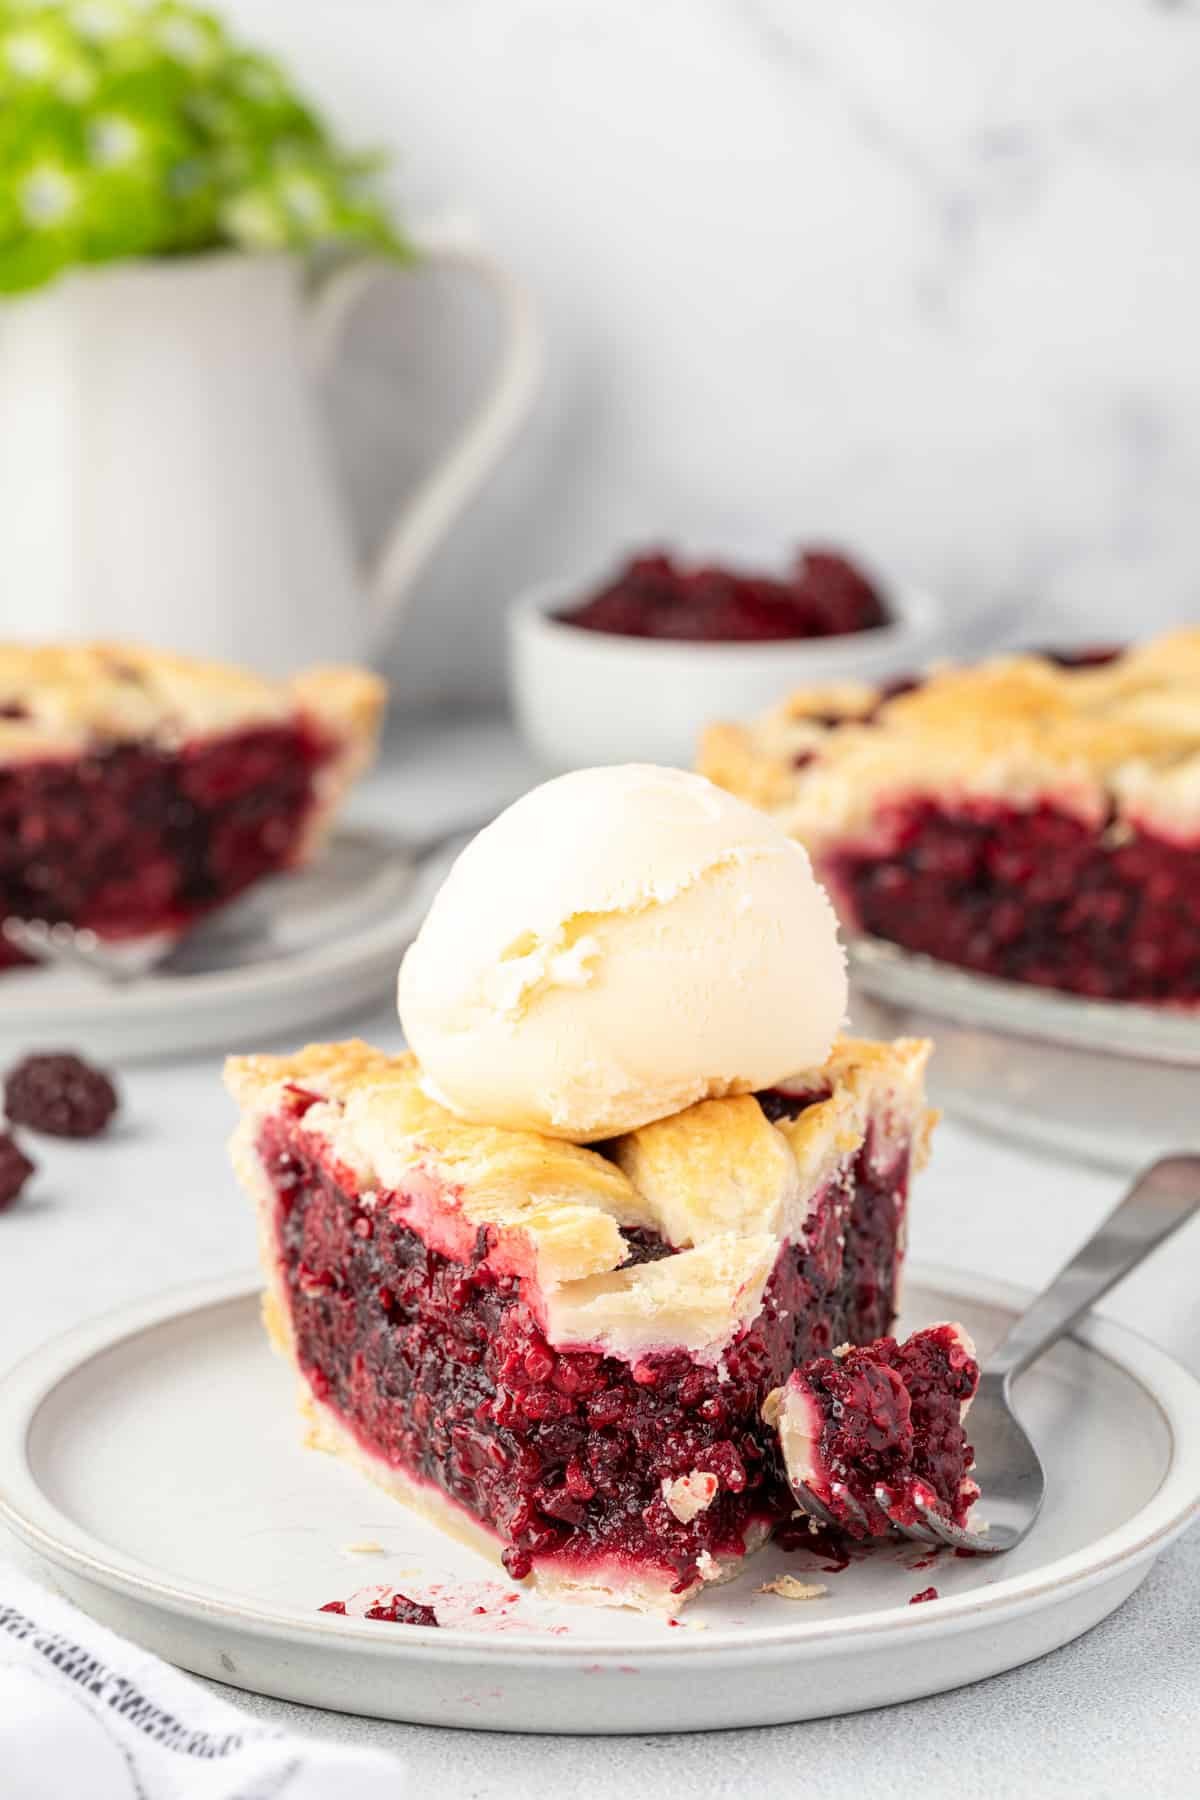 Slice of bright burgundy pie with a scoop of vanilla ice cream on top and a bite of pie on a fork.